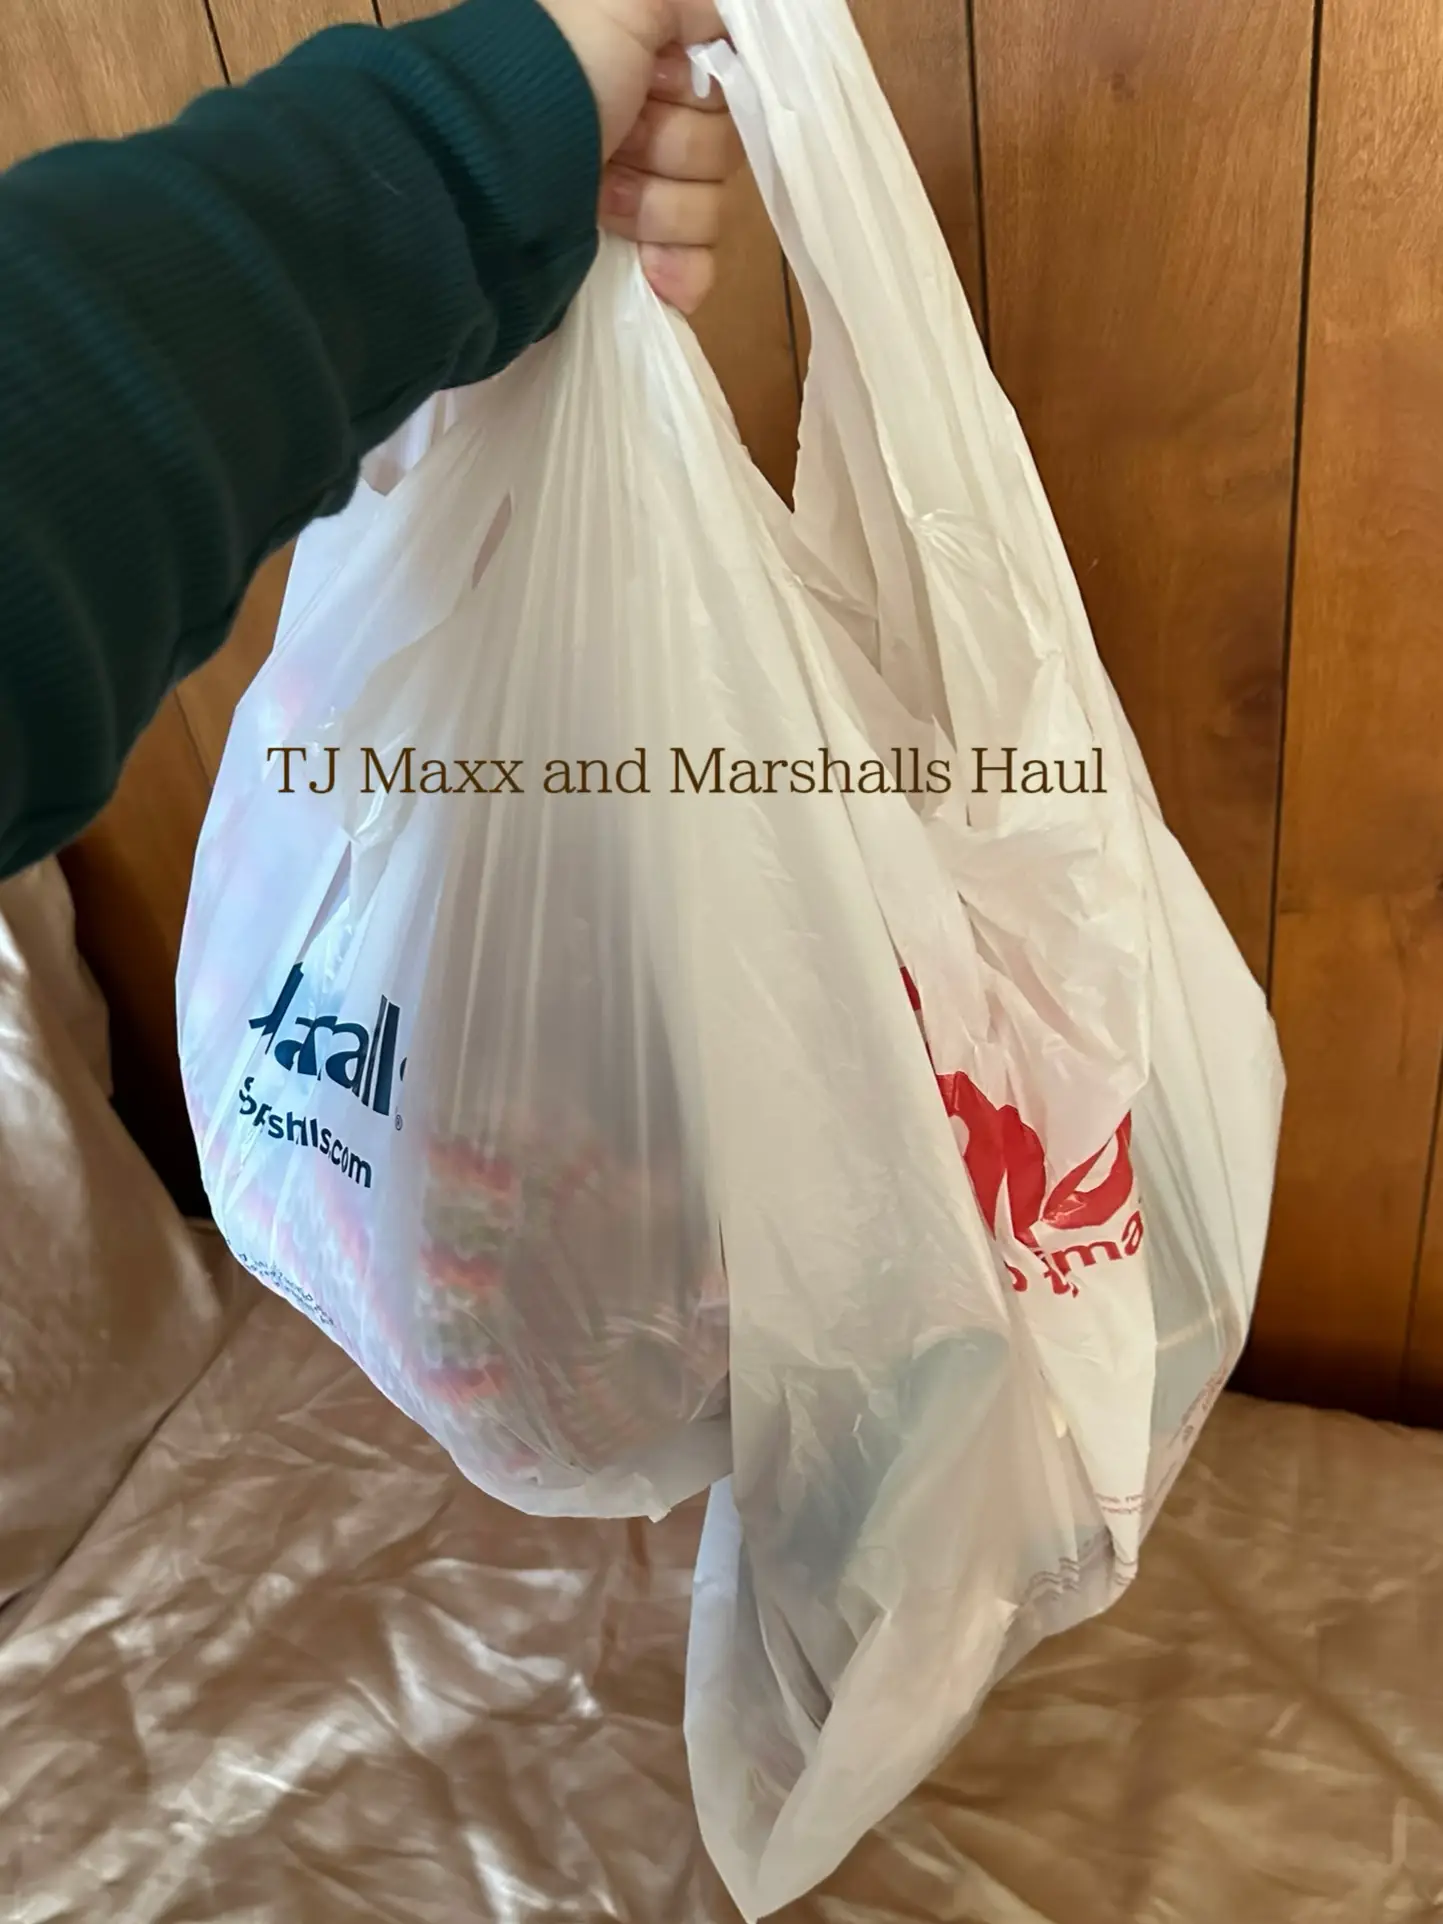 marshalls and tj maxx haul 🍓, Gallery posted by EM